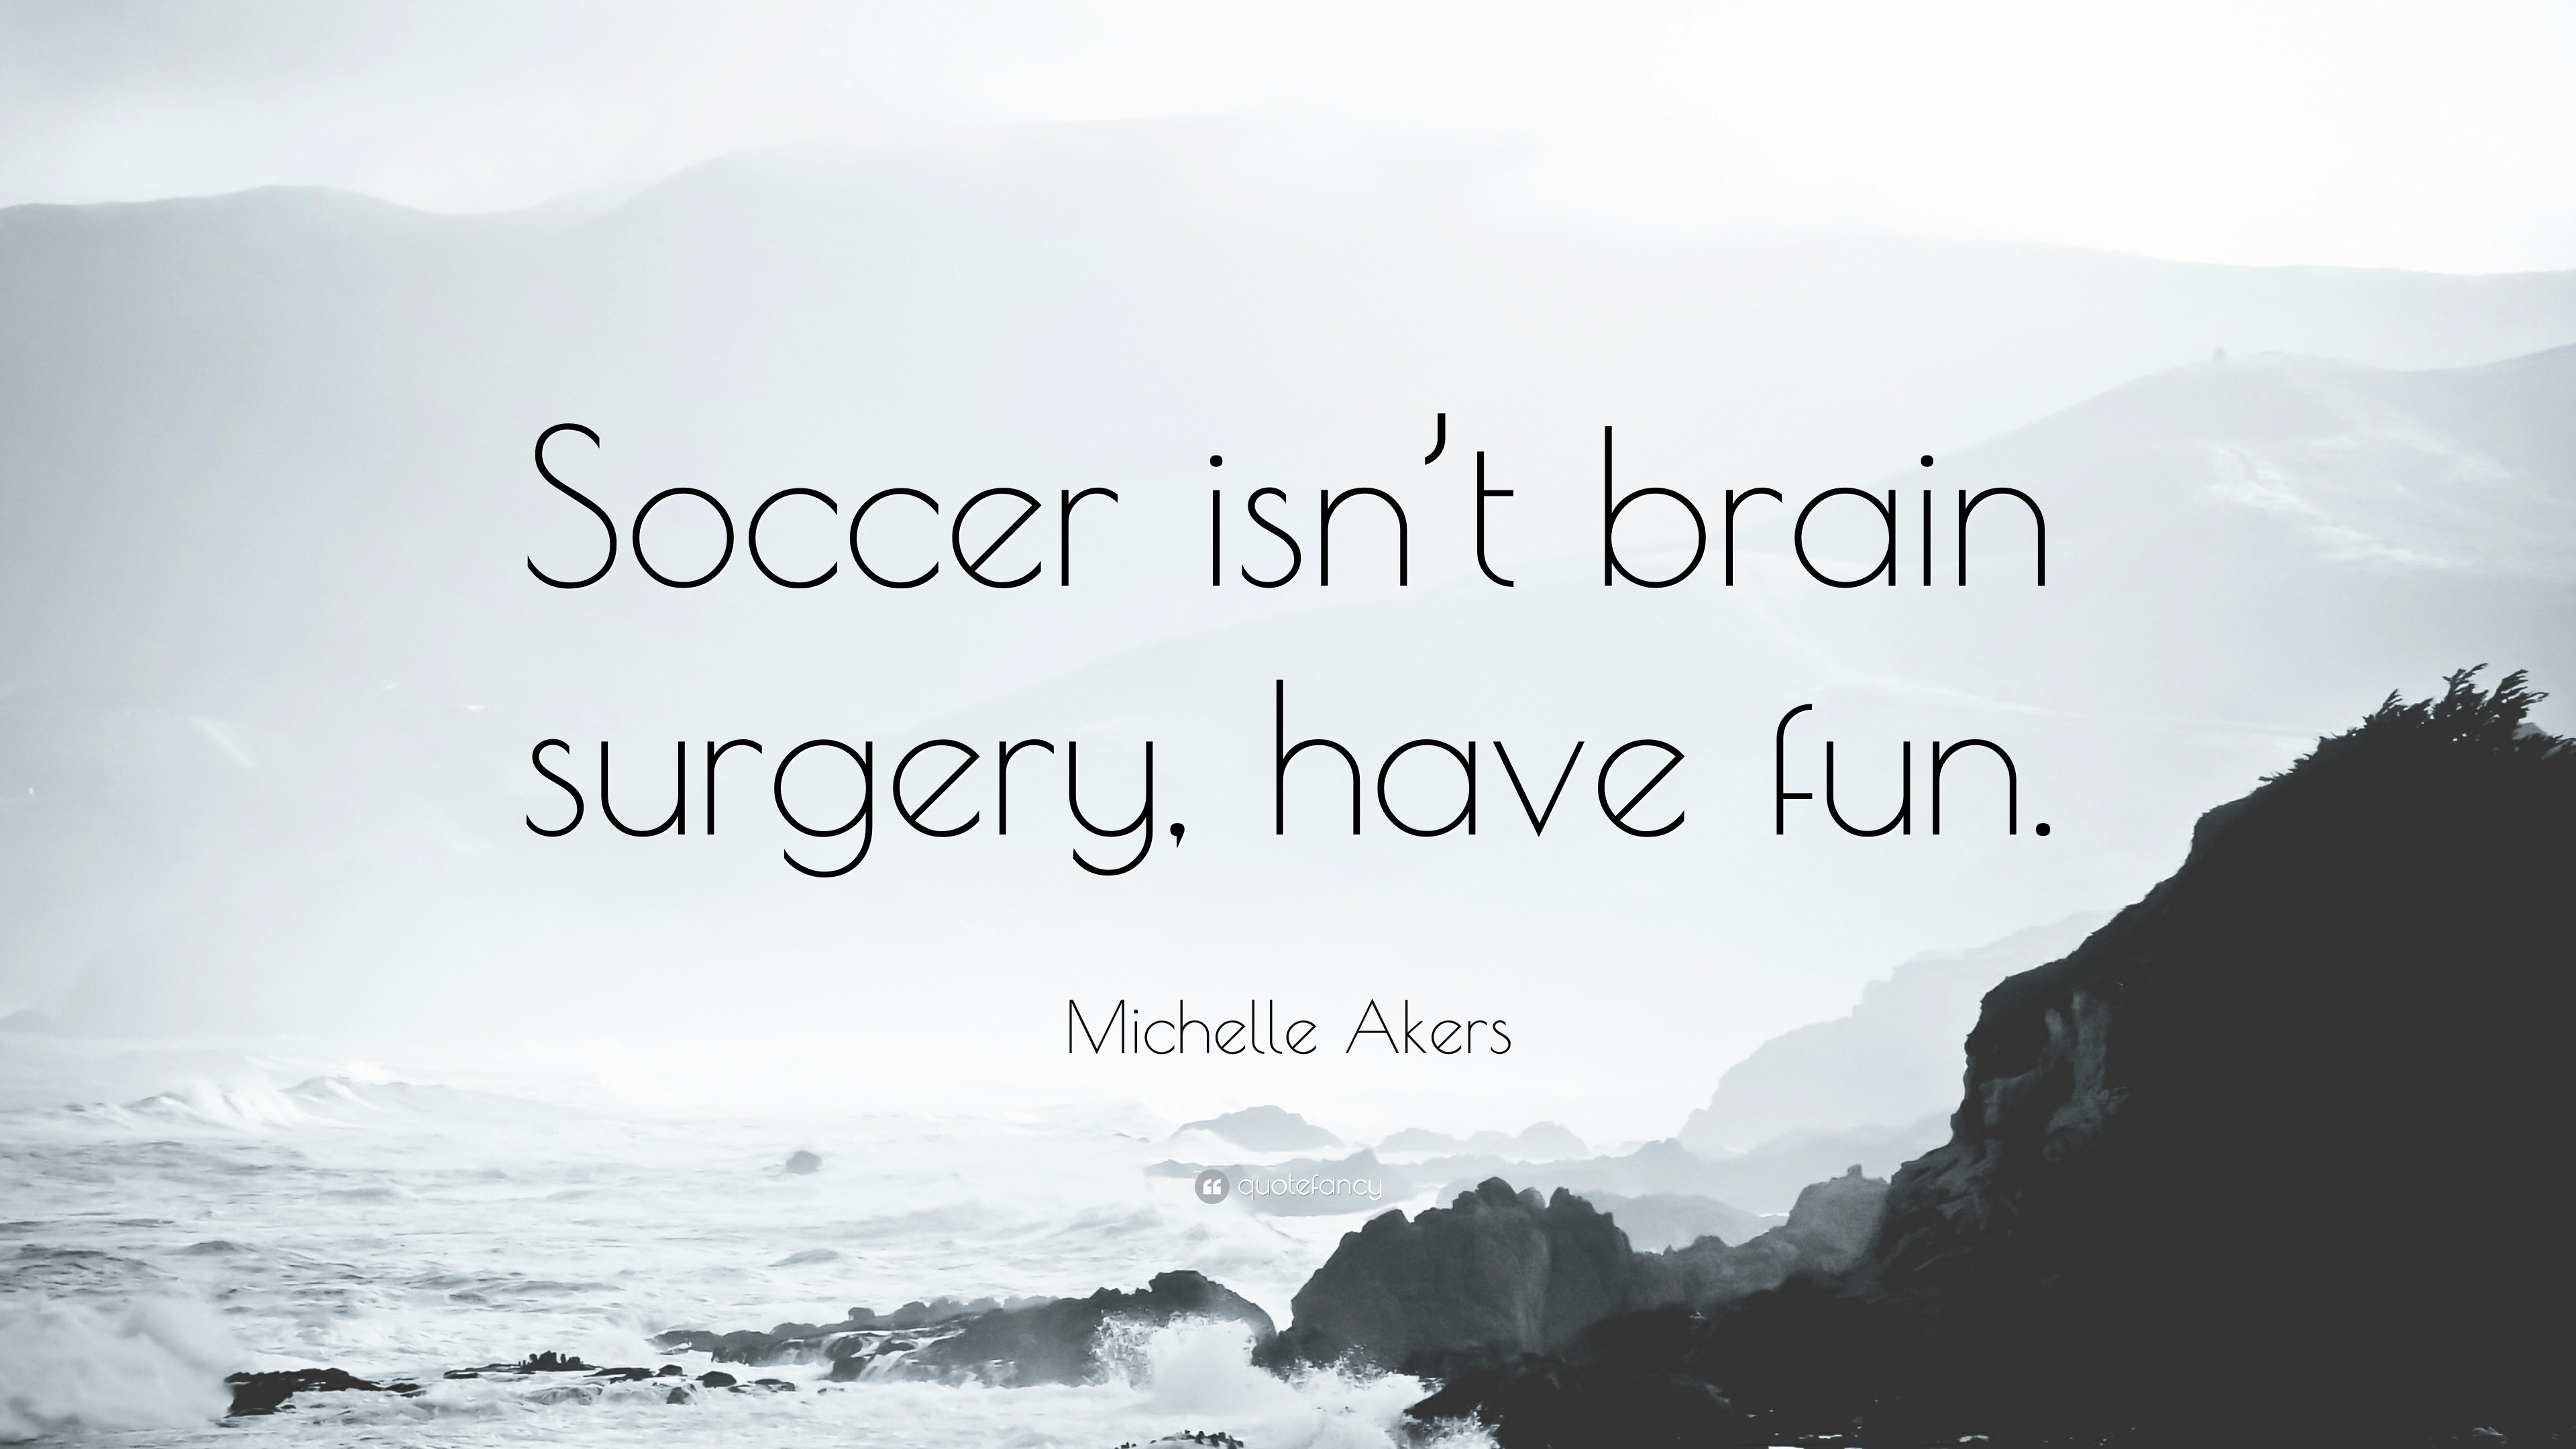 40 Inspirational Soccer Quotes for Players and Coaches  SOCCERCOM  Soccer  quotes Inspirational soccer quotes Motivational soccer quotes